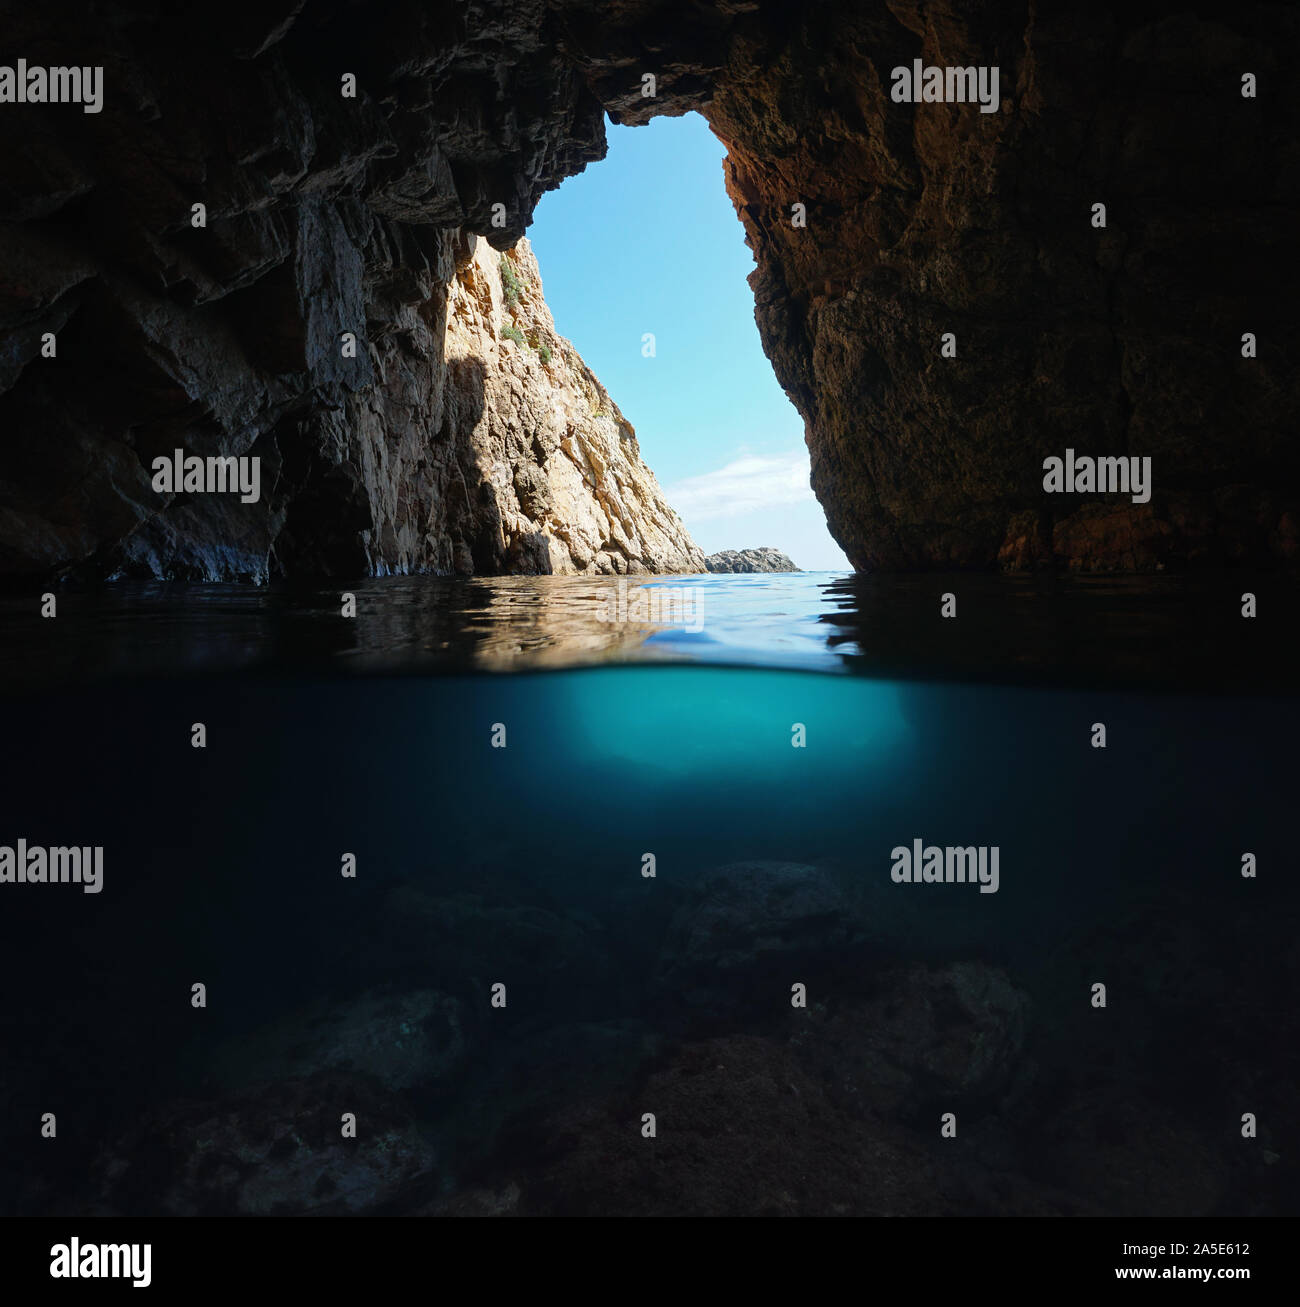 Under a rocky natural arch on the shore of the Mediterranean sea, split view over and underwater, Spain, Costa Brava, Catalonia, Palamos Stock Photo